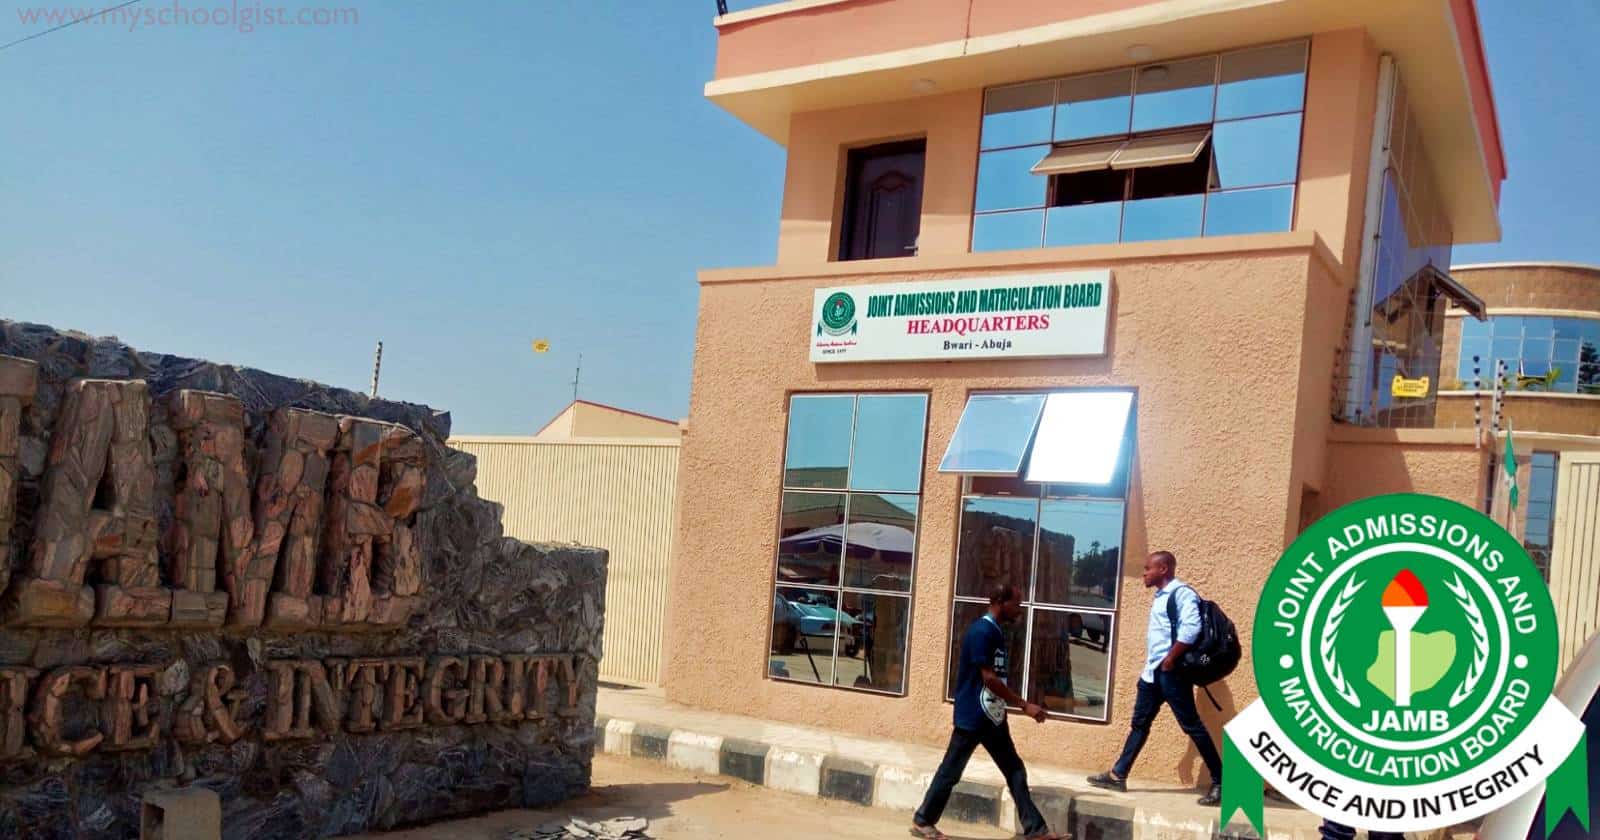 JAMB to bar students from direct entry admissions